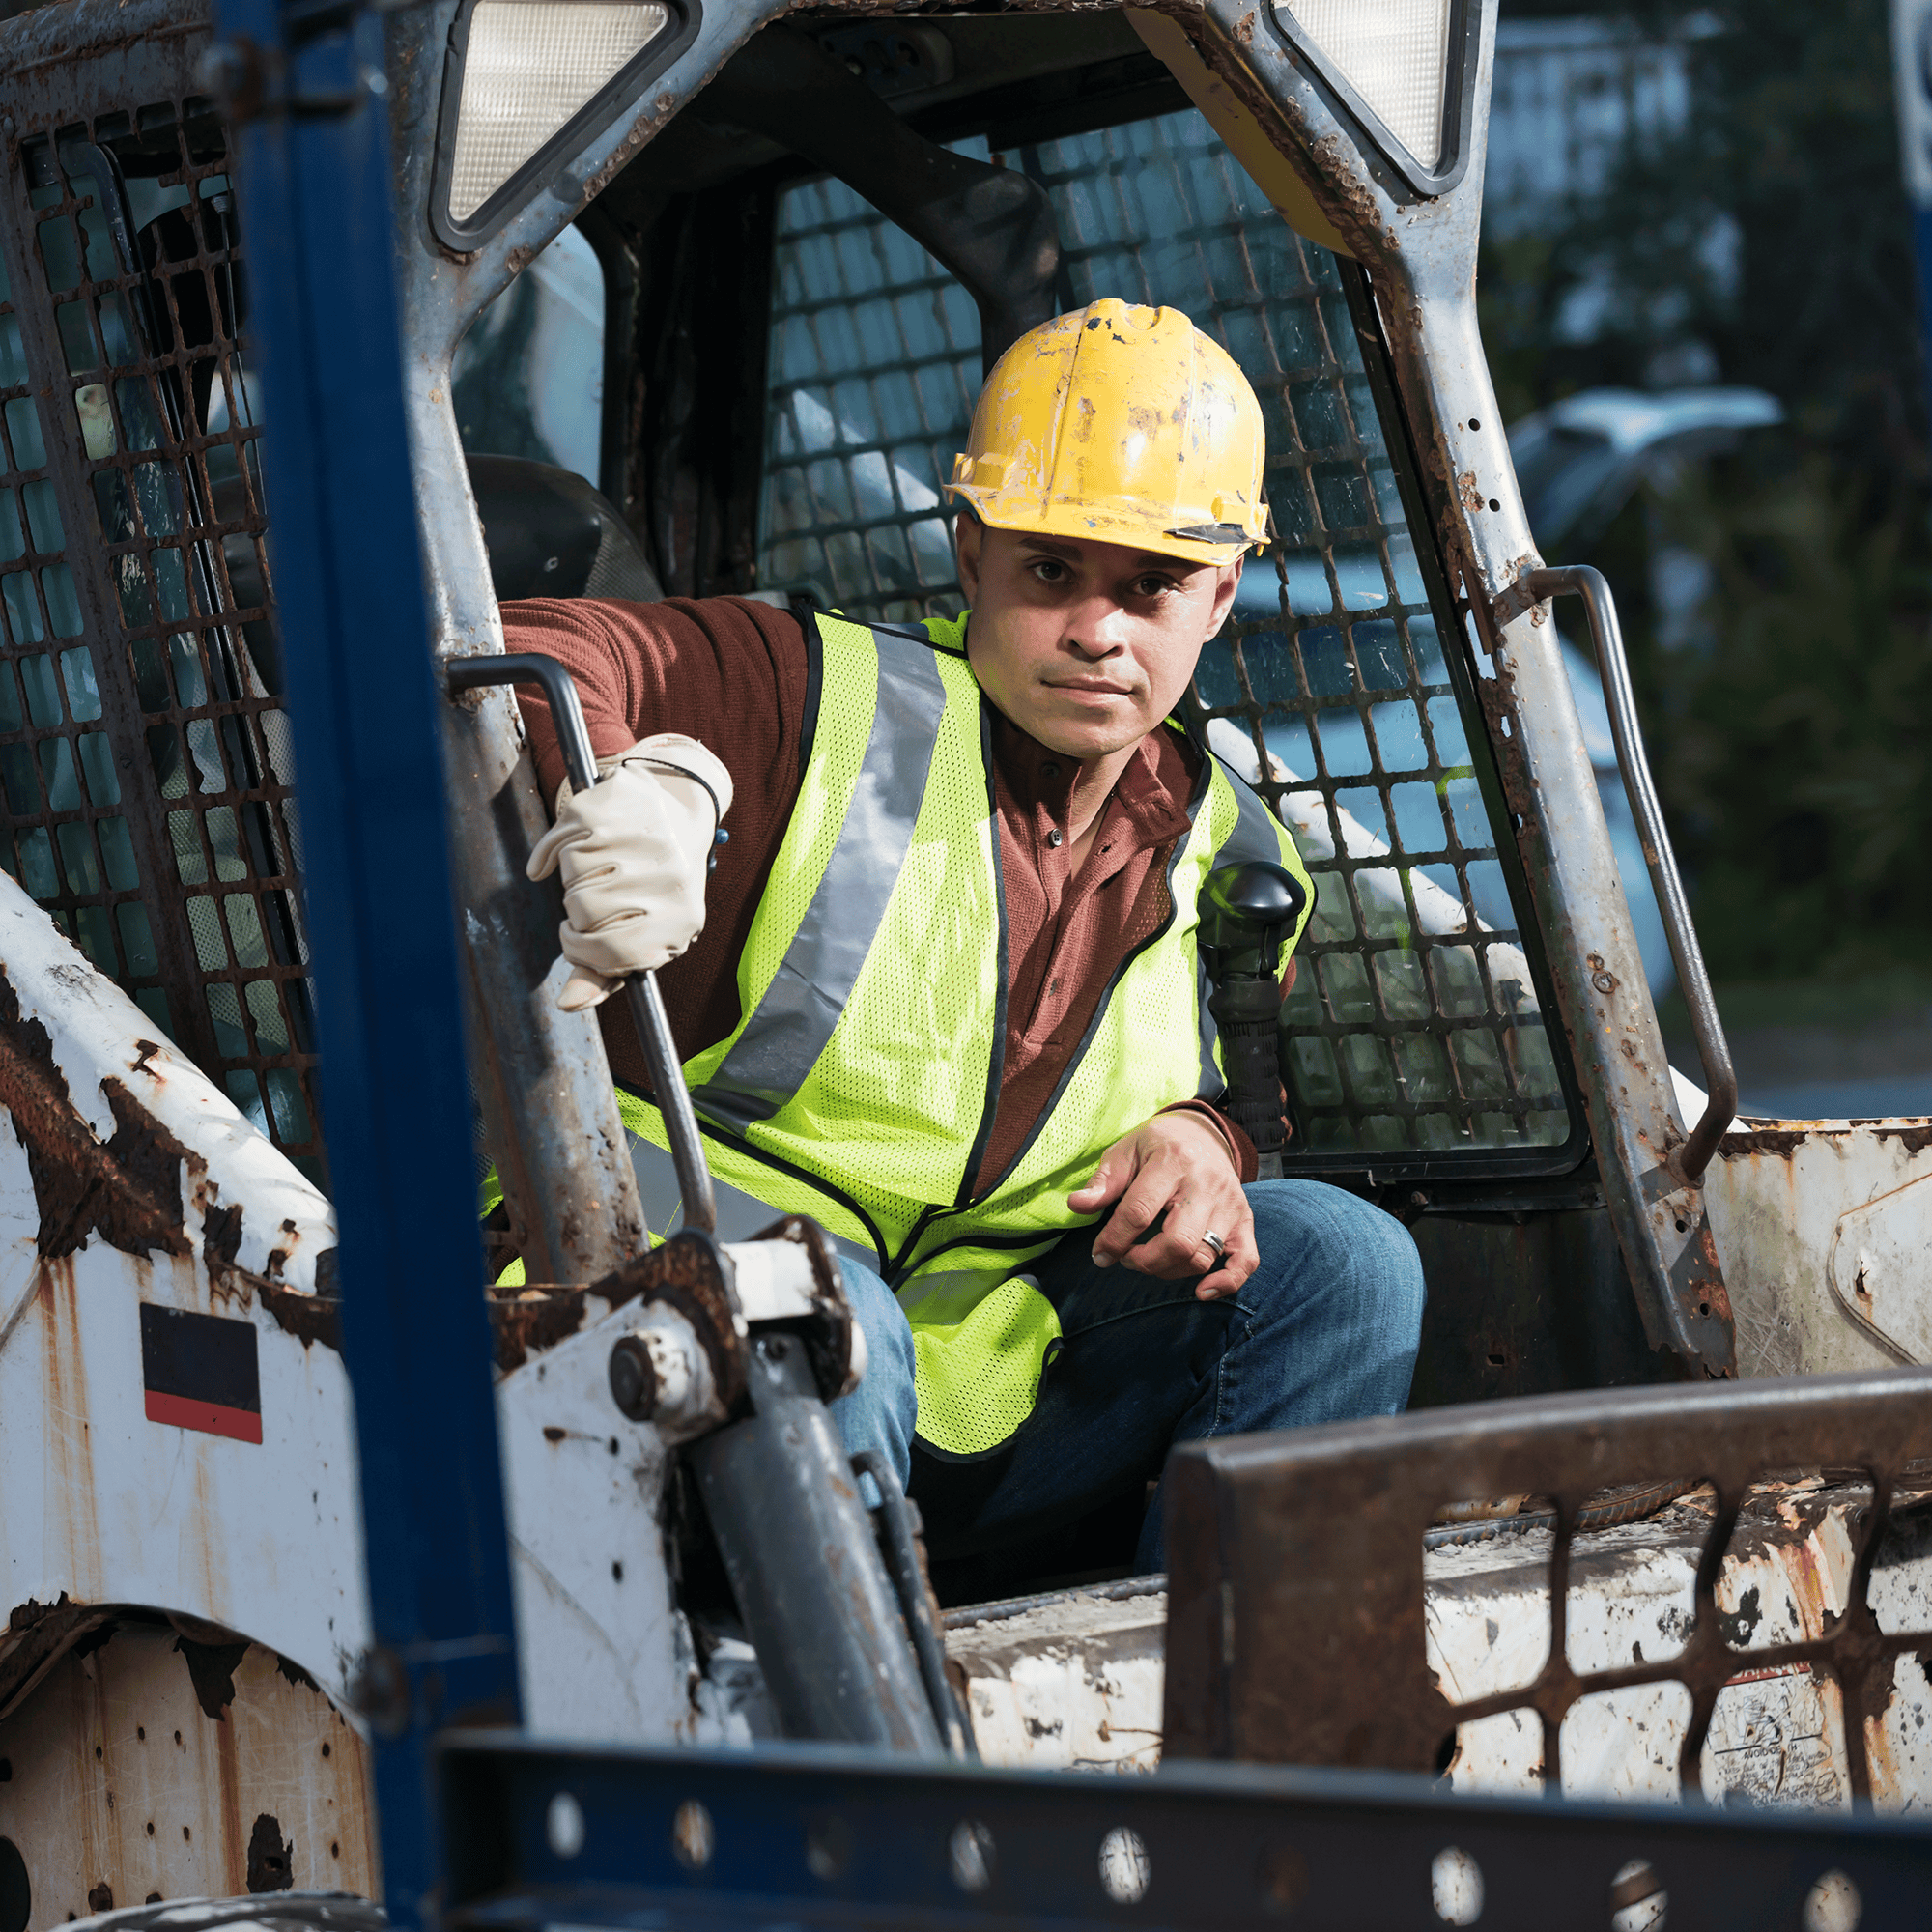 Man wearing safety vest and hard hat sitting in the cap of a skid steer